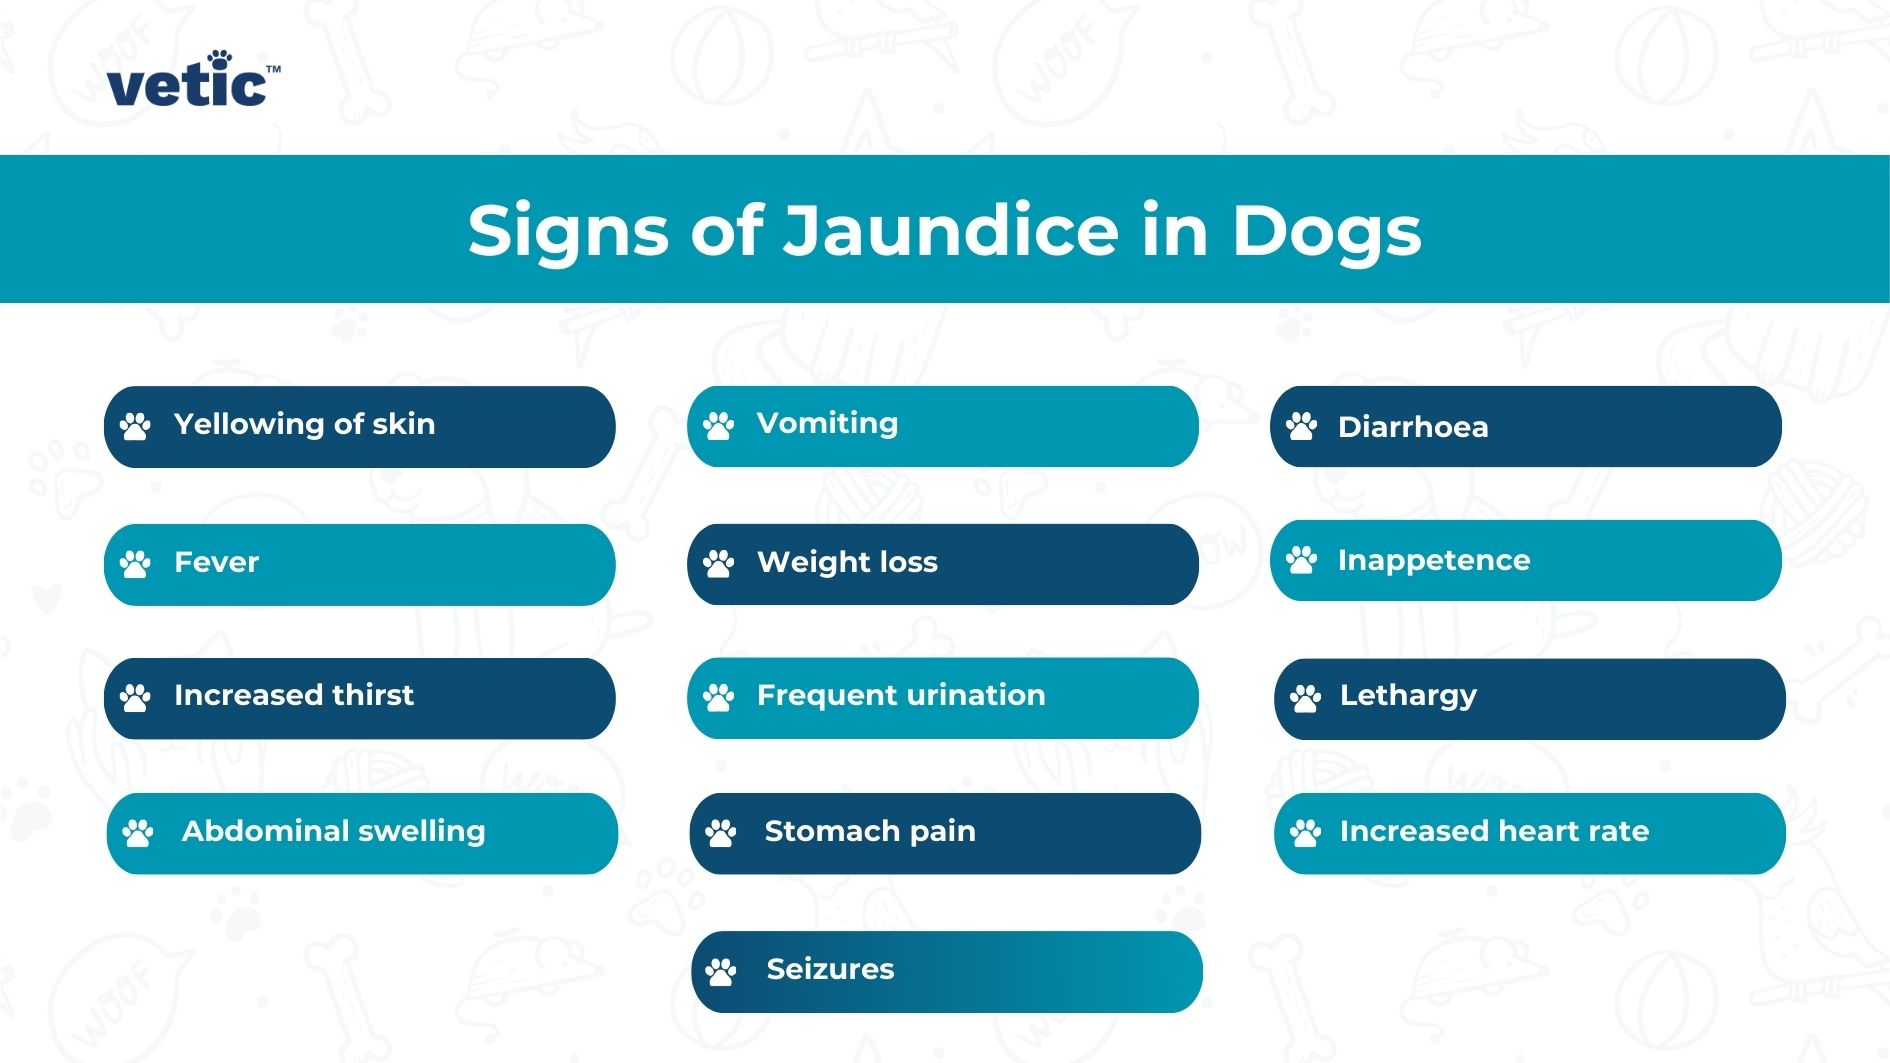 The image is a visual guide created by “Vetic®” that outlines the “Signs of Jaundice in Dogs”. It features a light blue background with faint illustrations of various dog breeds. The title “Signs of Jaundice in Dogs” is prominently displayed at the top. Below the title are twelve symptoms listed on dark blue tabs: Yellowing of skin, Vomiting, Diarrhoea, Fever, Weight loss, Inappetence, Increased thirst, Frequent urination, Lethargy, Abdominal swelling, Stomach pain, Increased heart rate, and Seizures. Each symptom tab has an icon to its left representing the specific symptom visually.